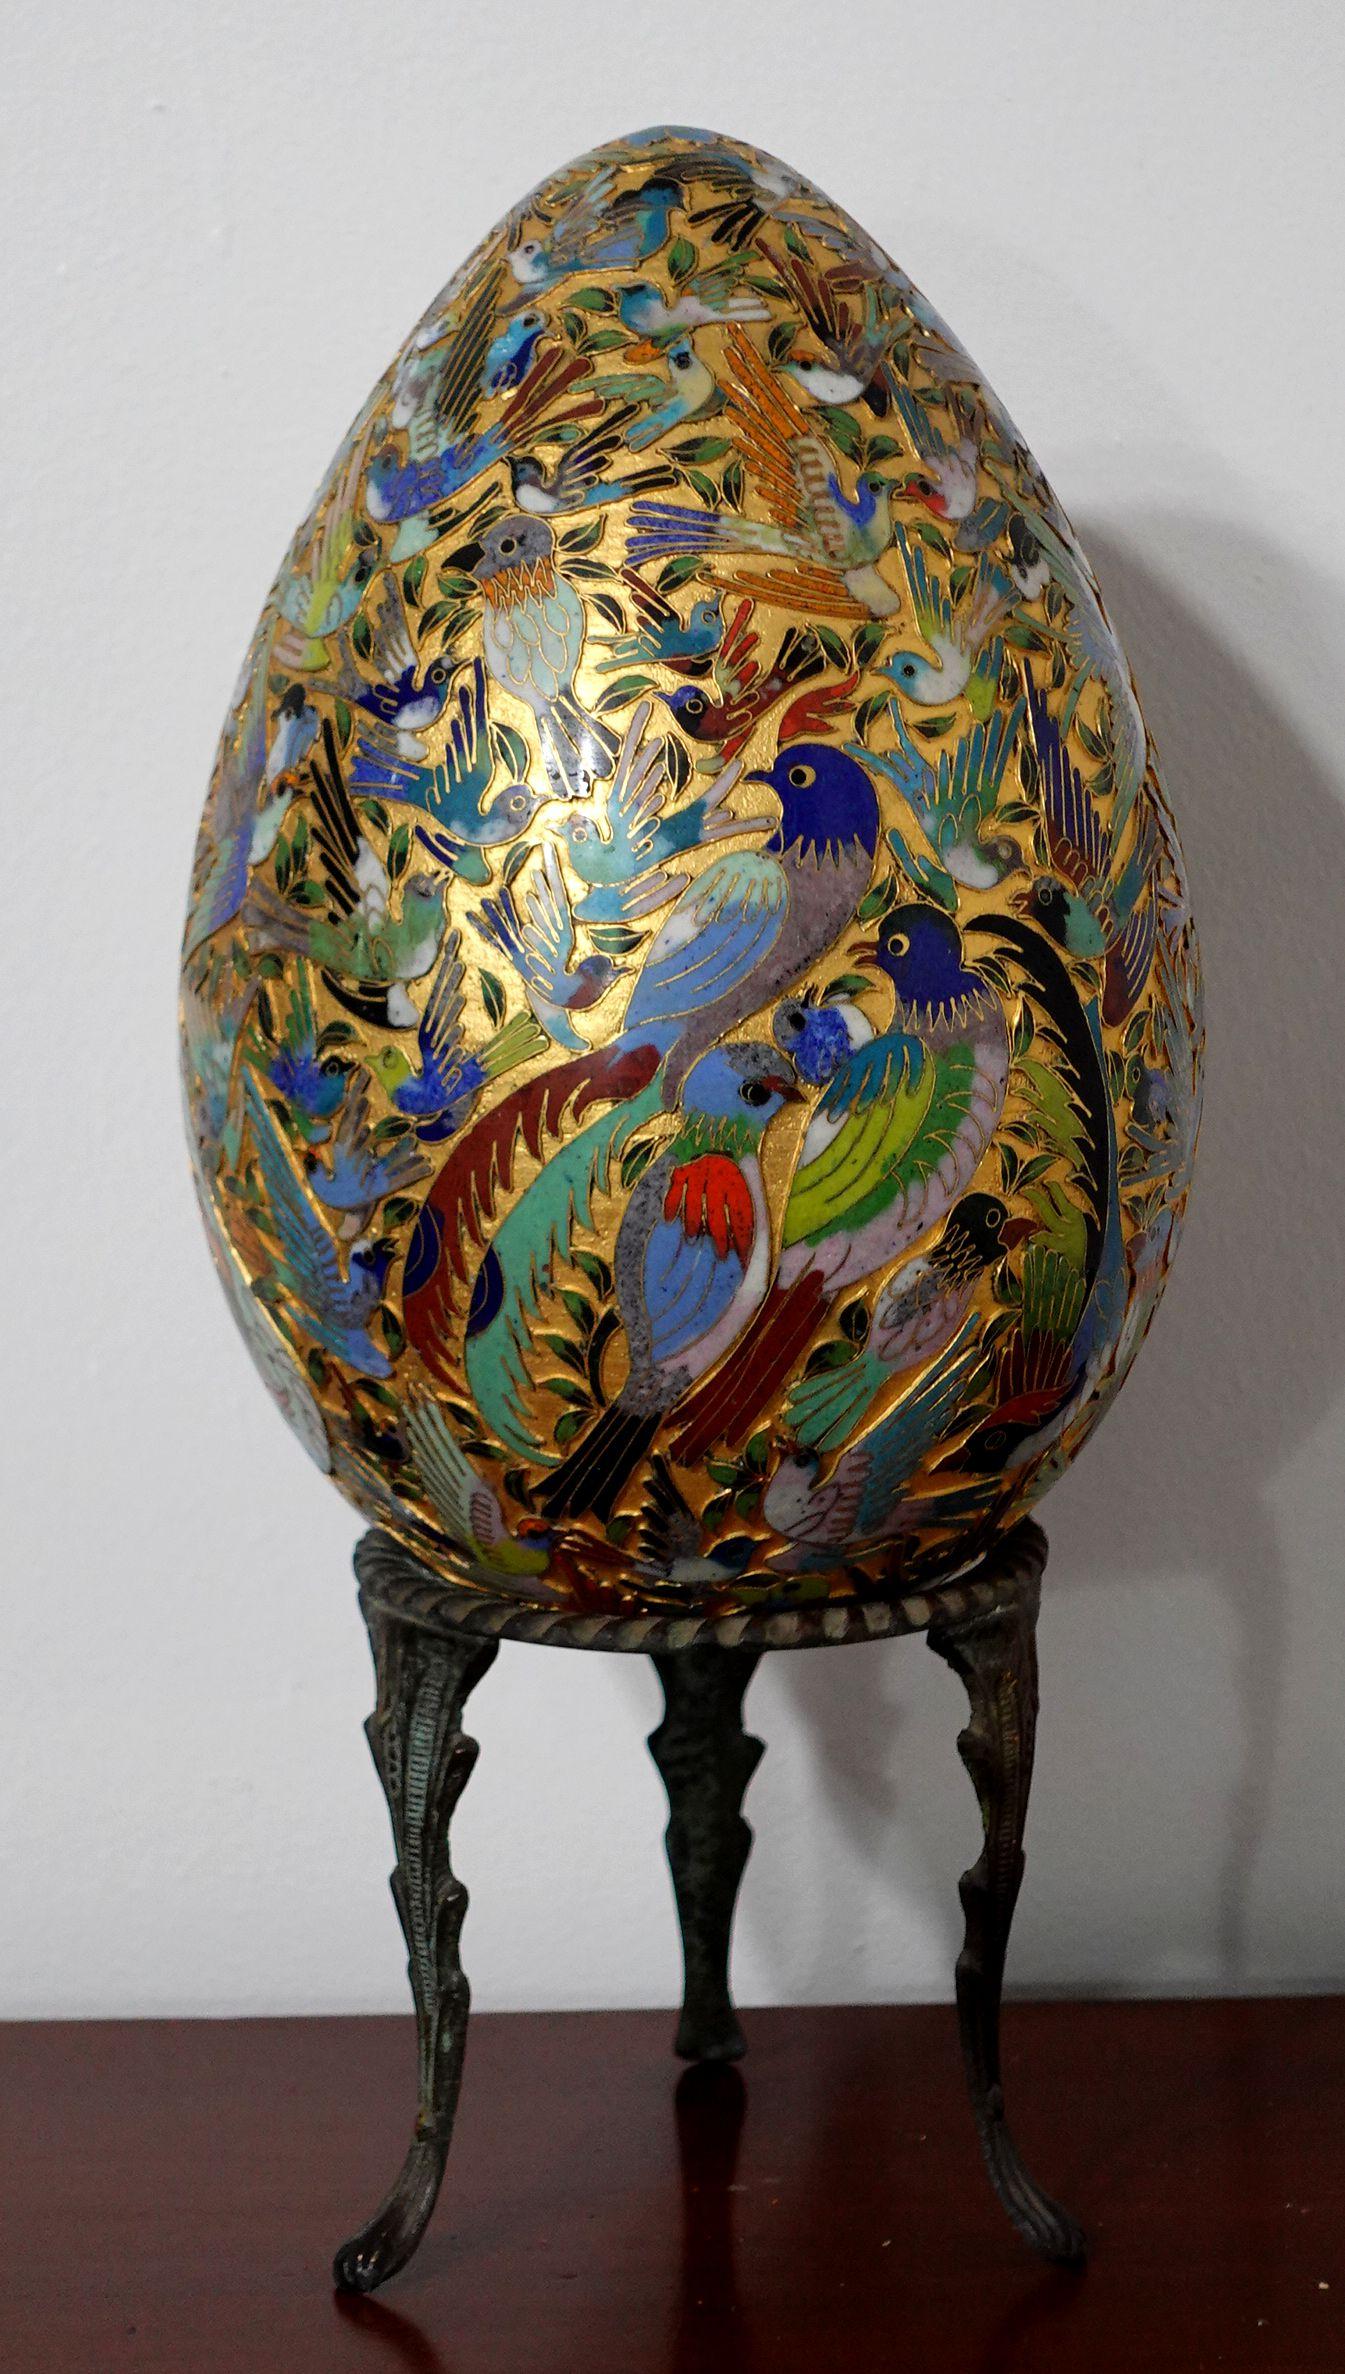 Presenting a supper large and beautiful Chinese cloisonné enamel egg with intricated patterns of 